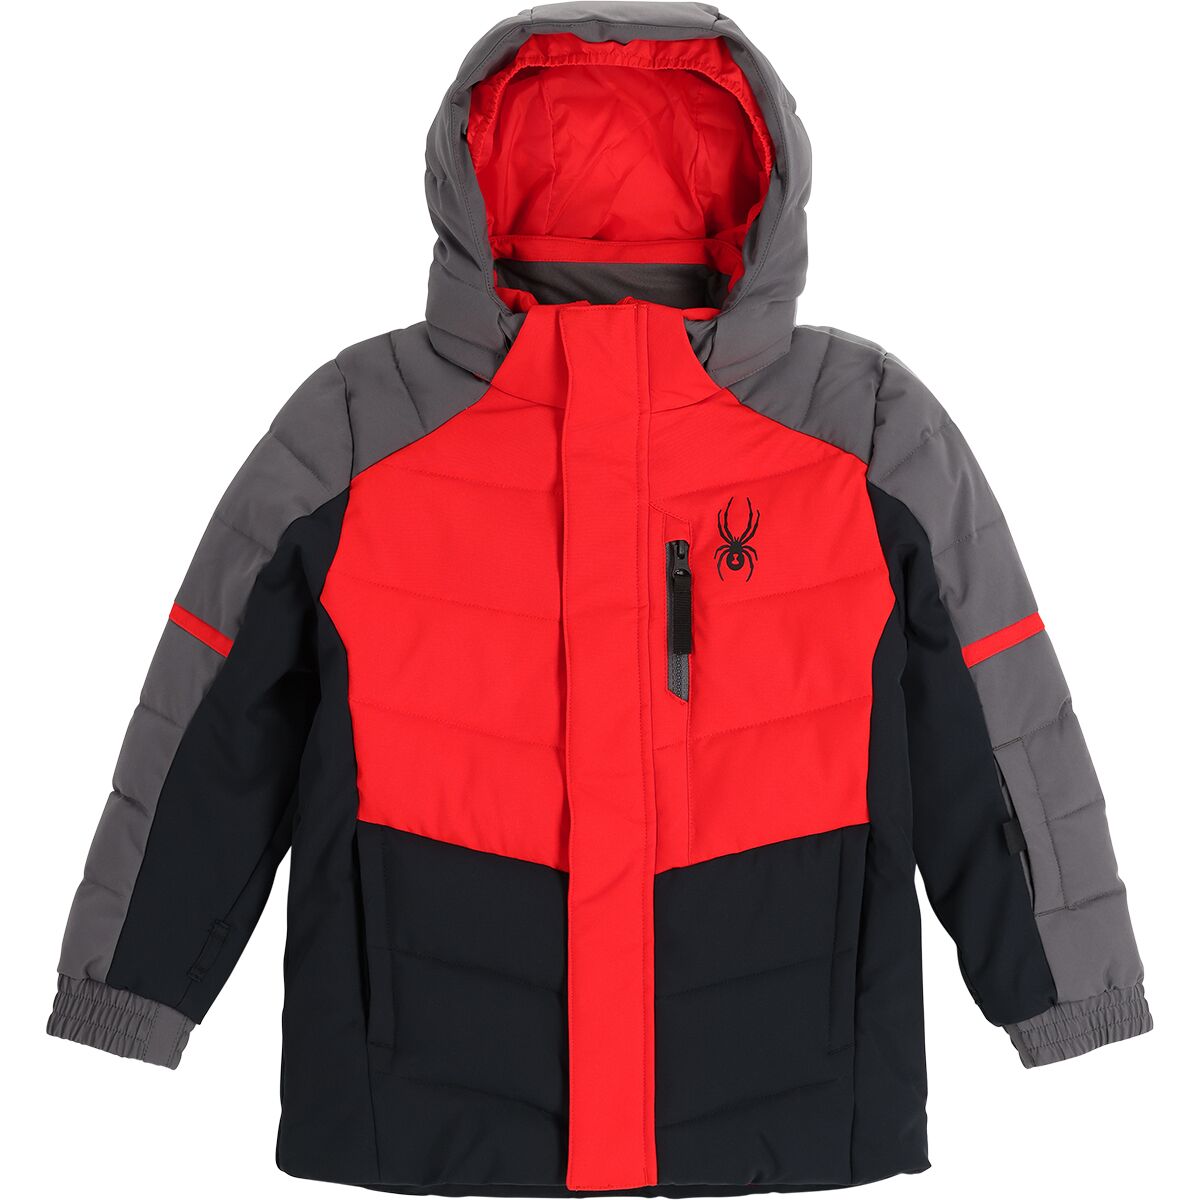 Spyder Impulse Synthetic Down Jacket - Toddlers'